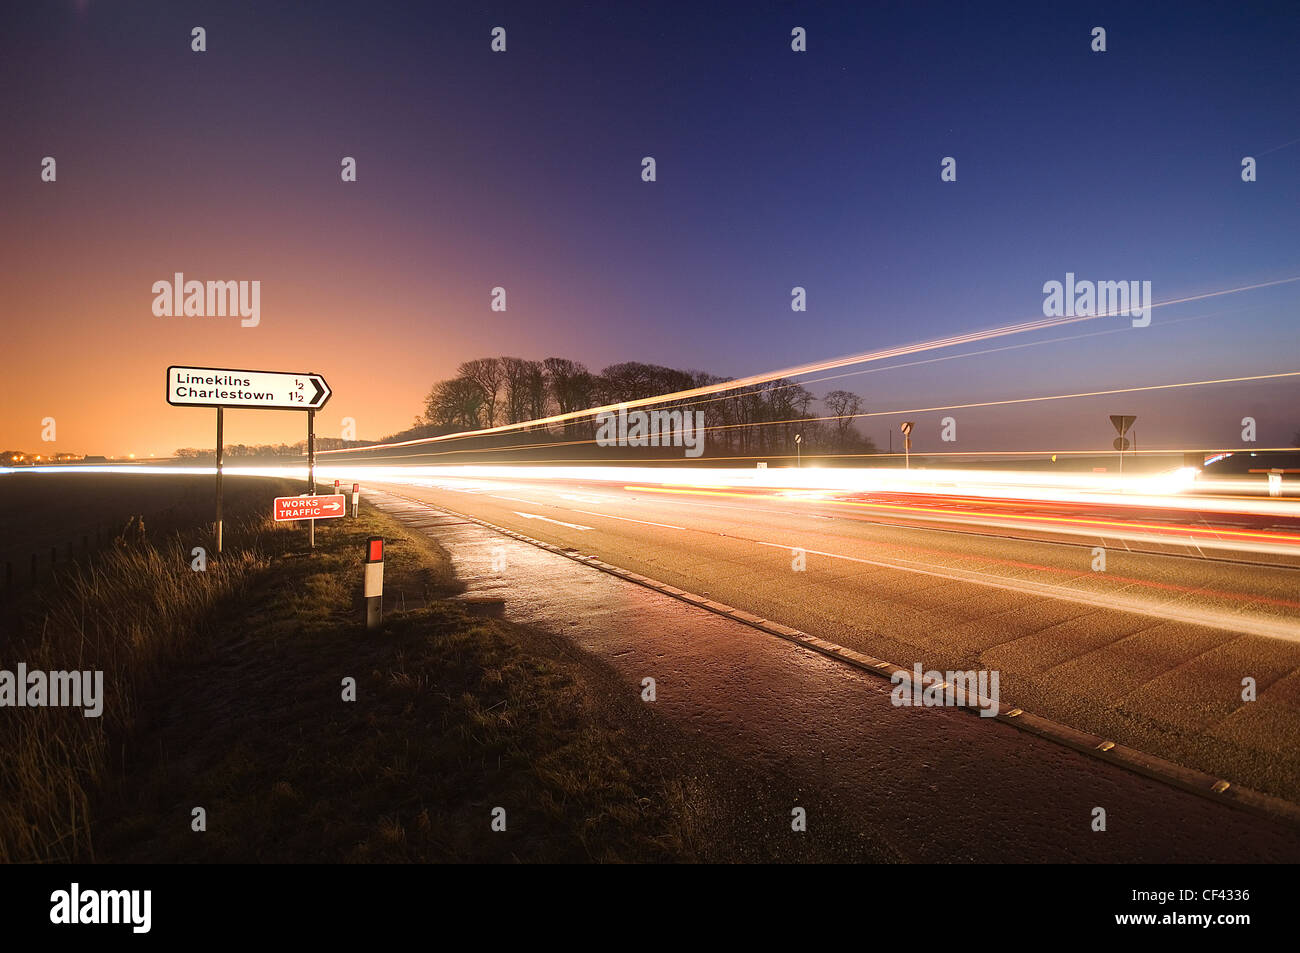 Car light trails on a road at night. Stock Photo